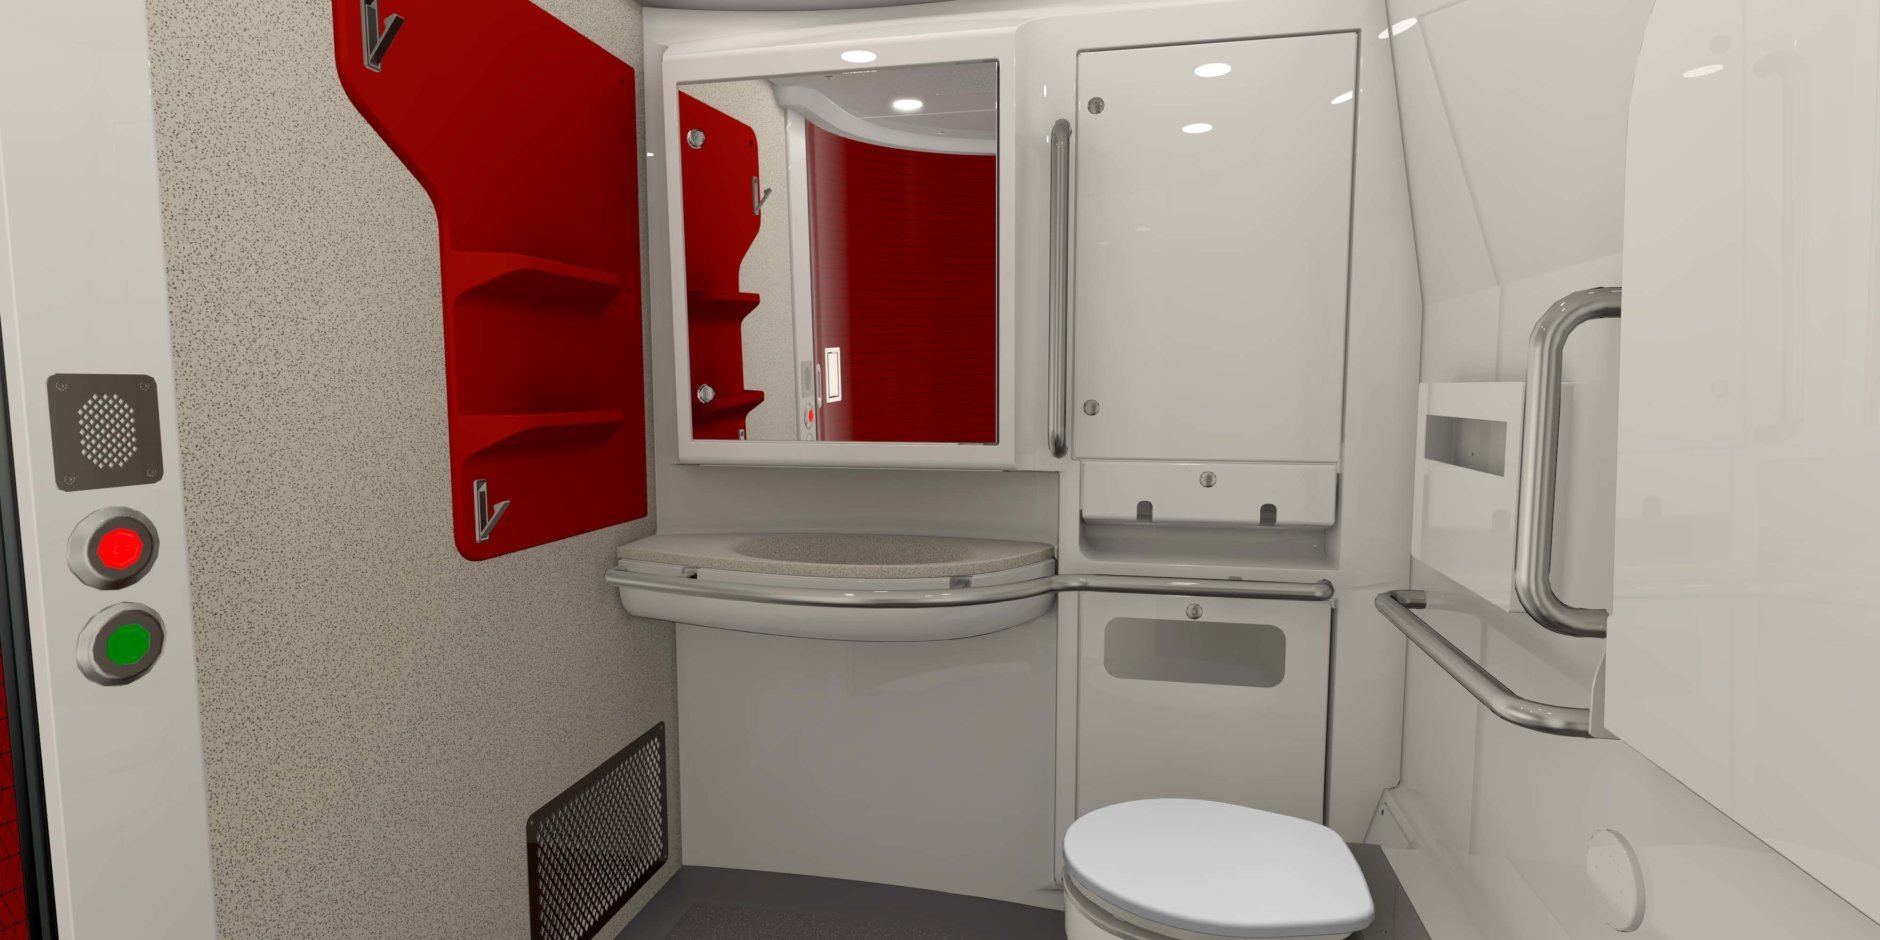 The new Acela trains feature spacious ADA-compliant restrooms with a 60-inch diameter turning radius. (Courtesy Amtrak)